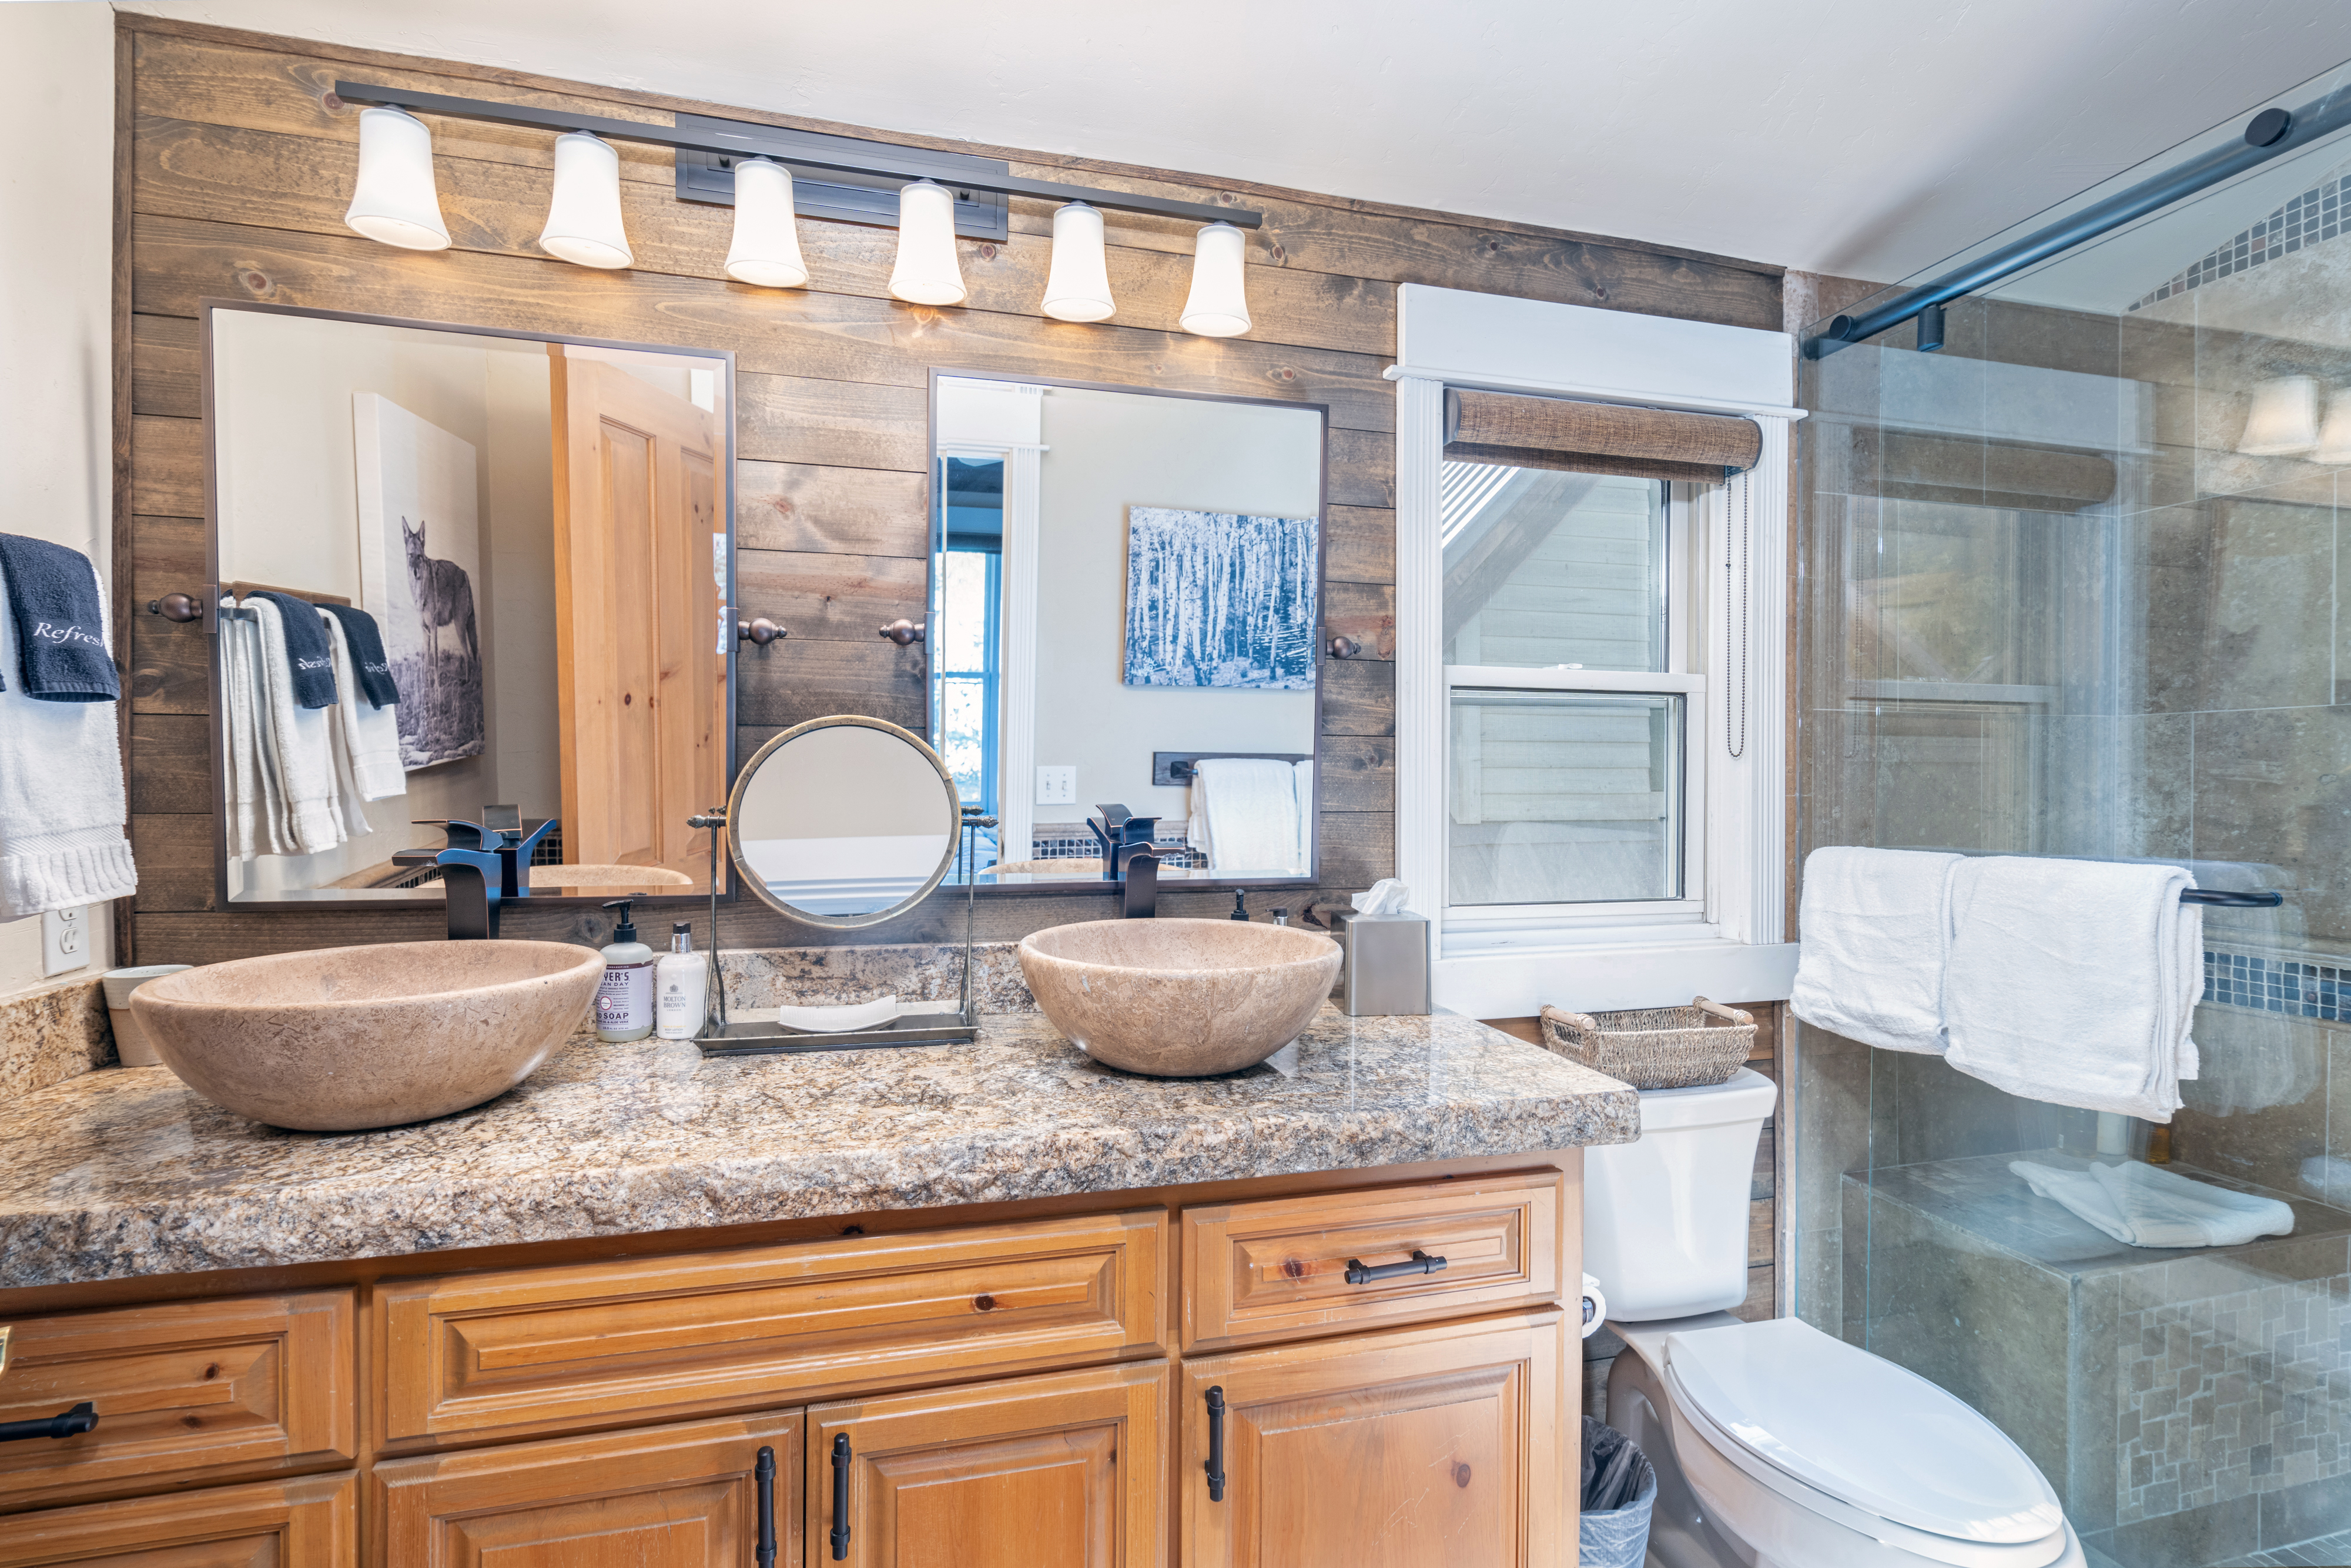 Double vanity makes getting ready a breeze!